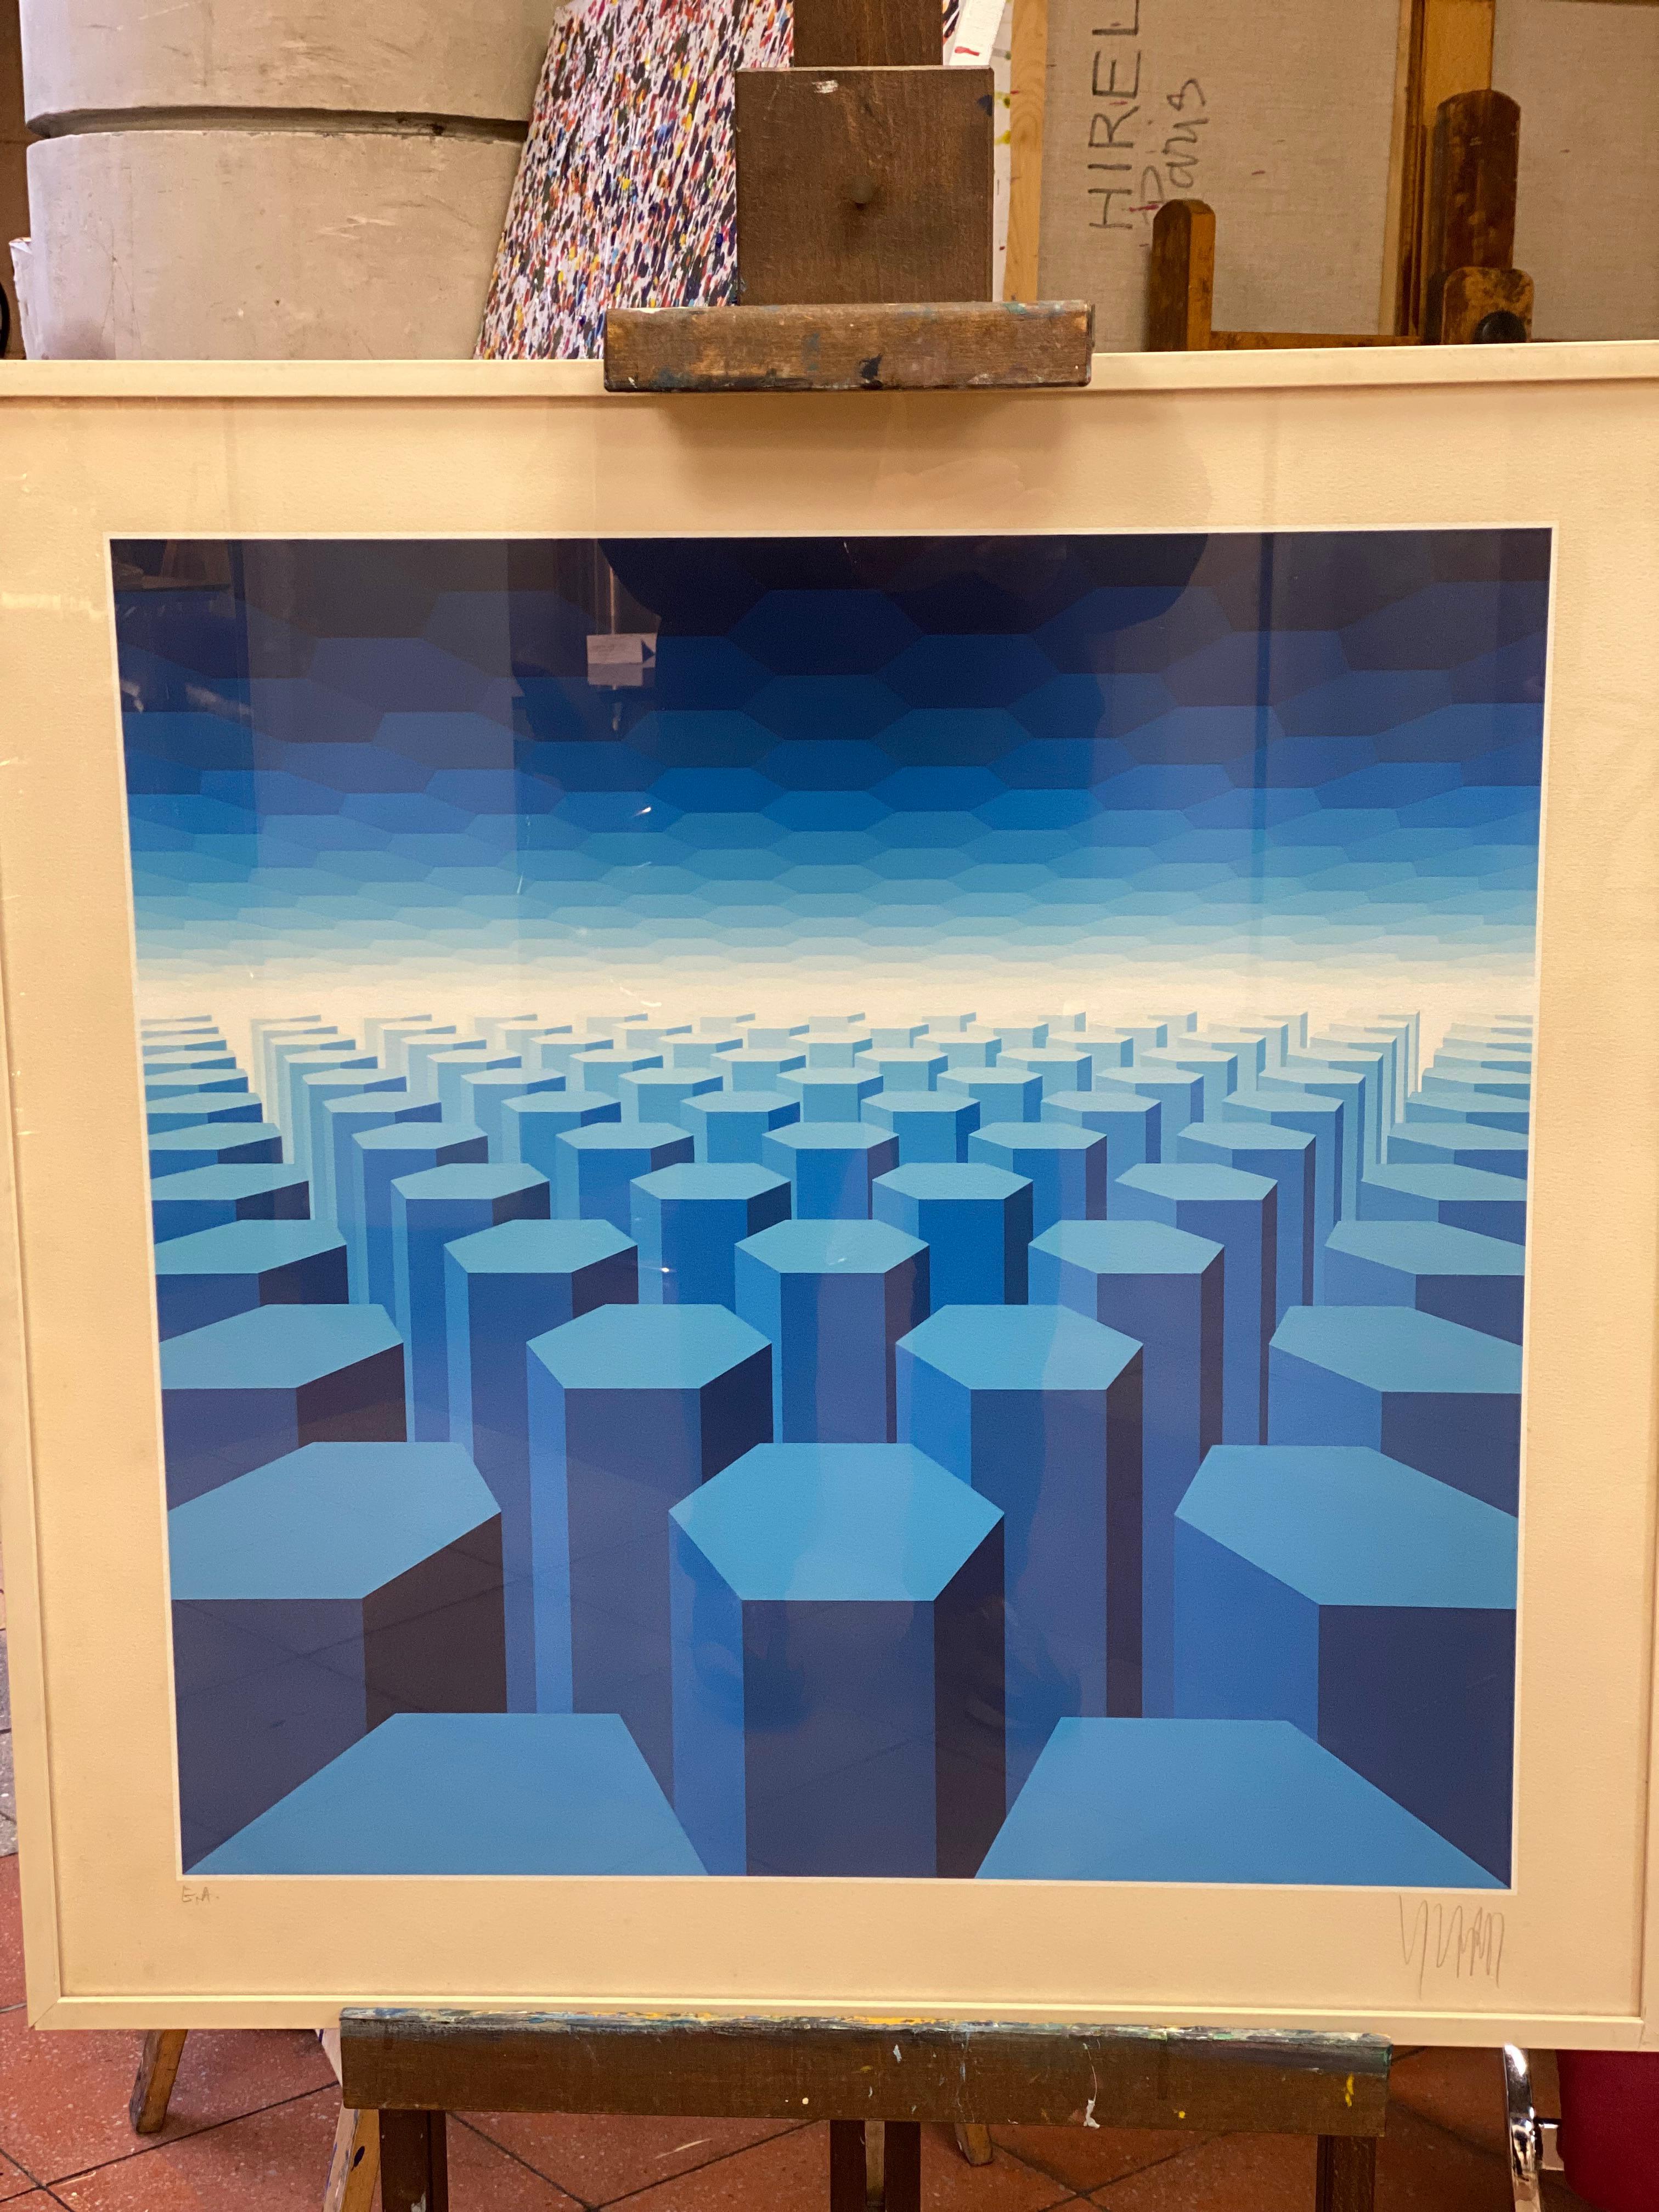 Yvaral (Jean Pierre Vasarely)
“So Shades of Blue”
Screen printing
Artist proof / 200 Ex
Monkey in pencil
Circa 1970
Frame 75 x 75 cm
In perfect good condition